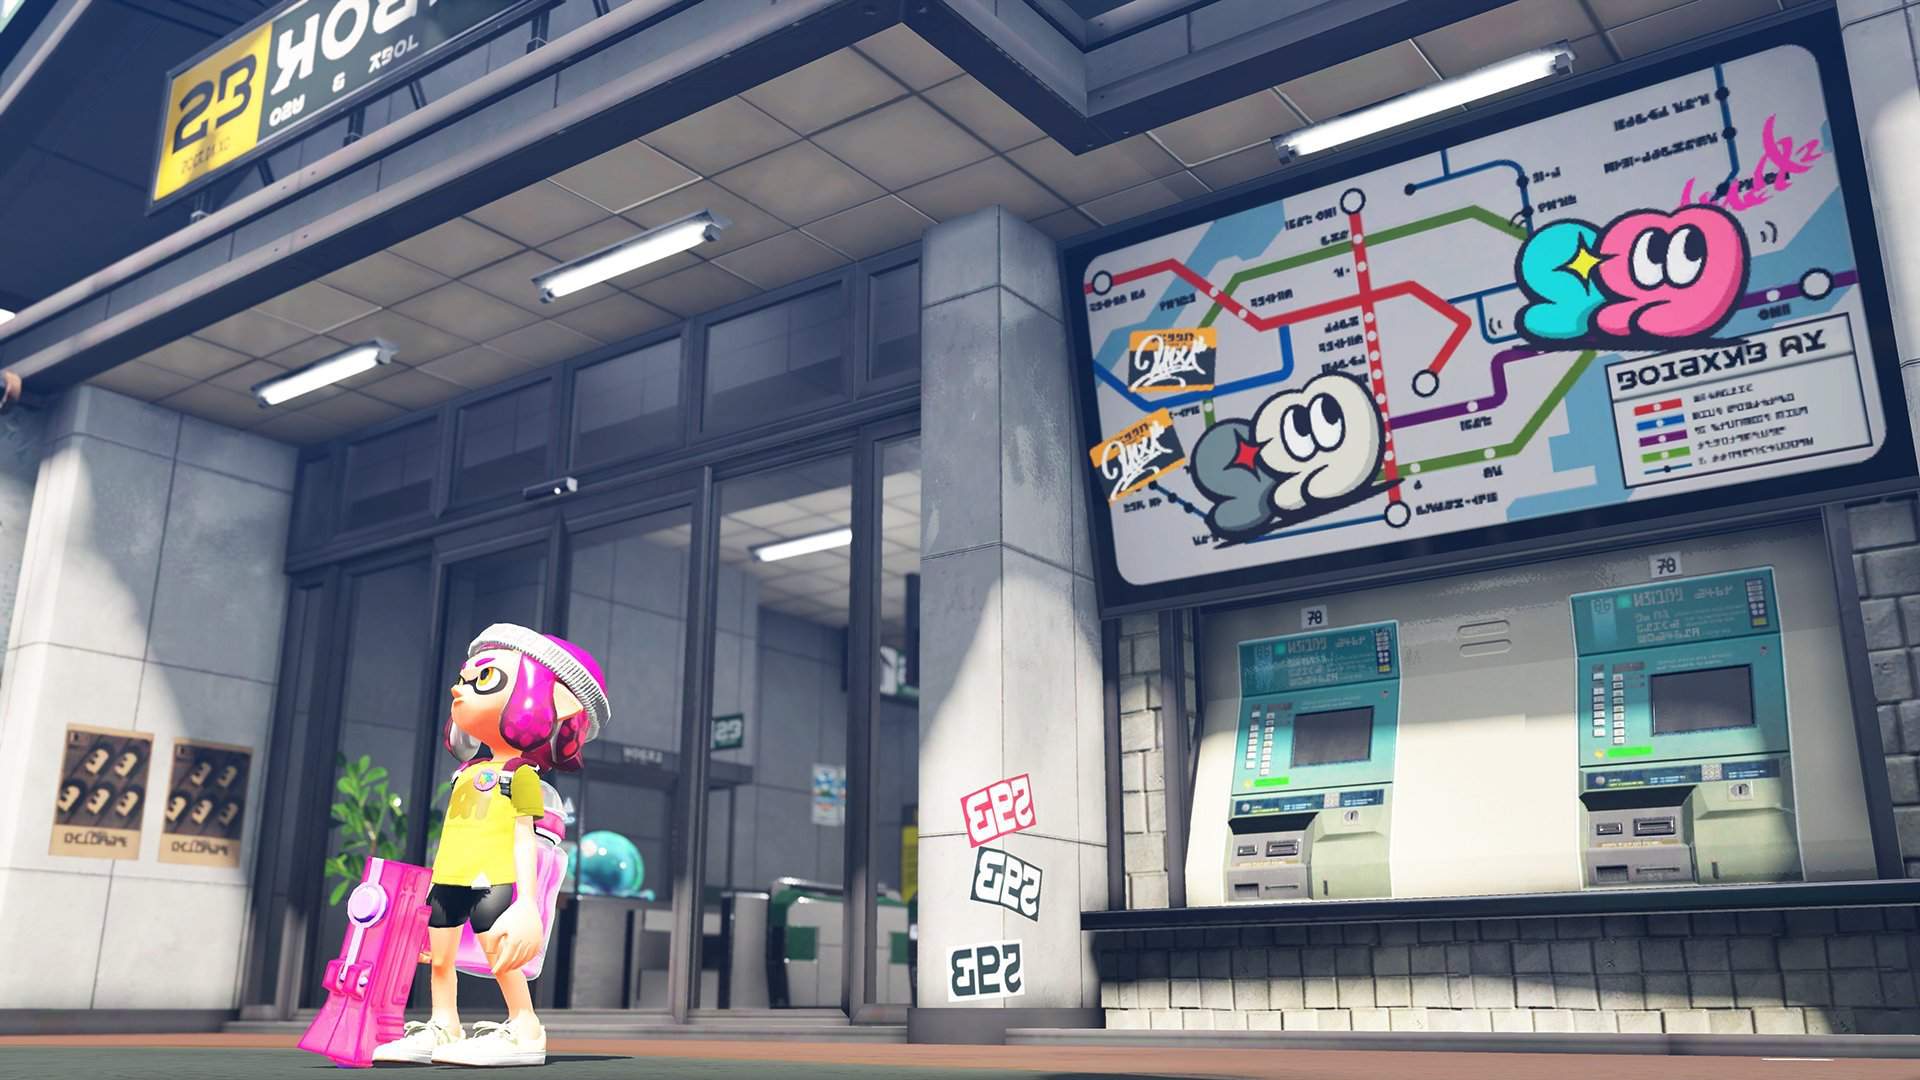 A new inkling steps outside of a city building